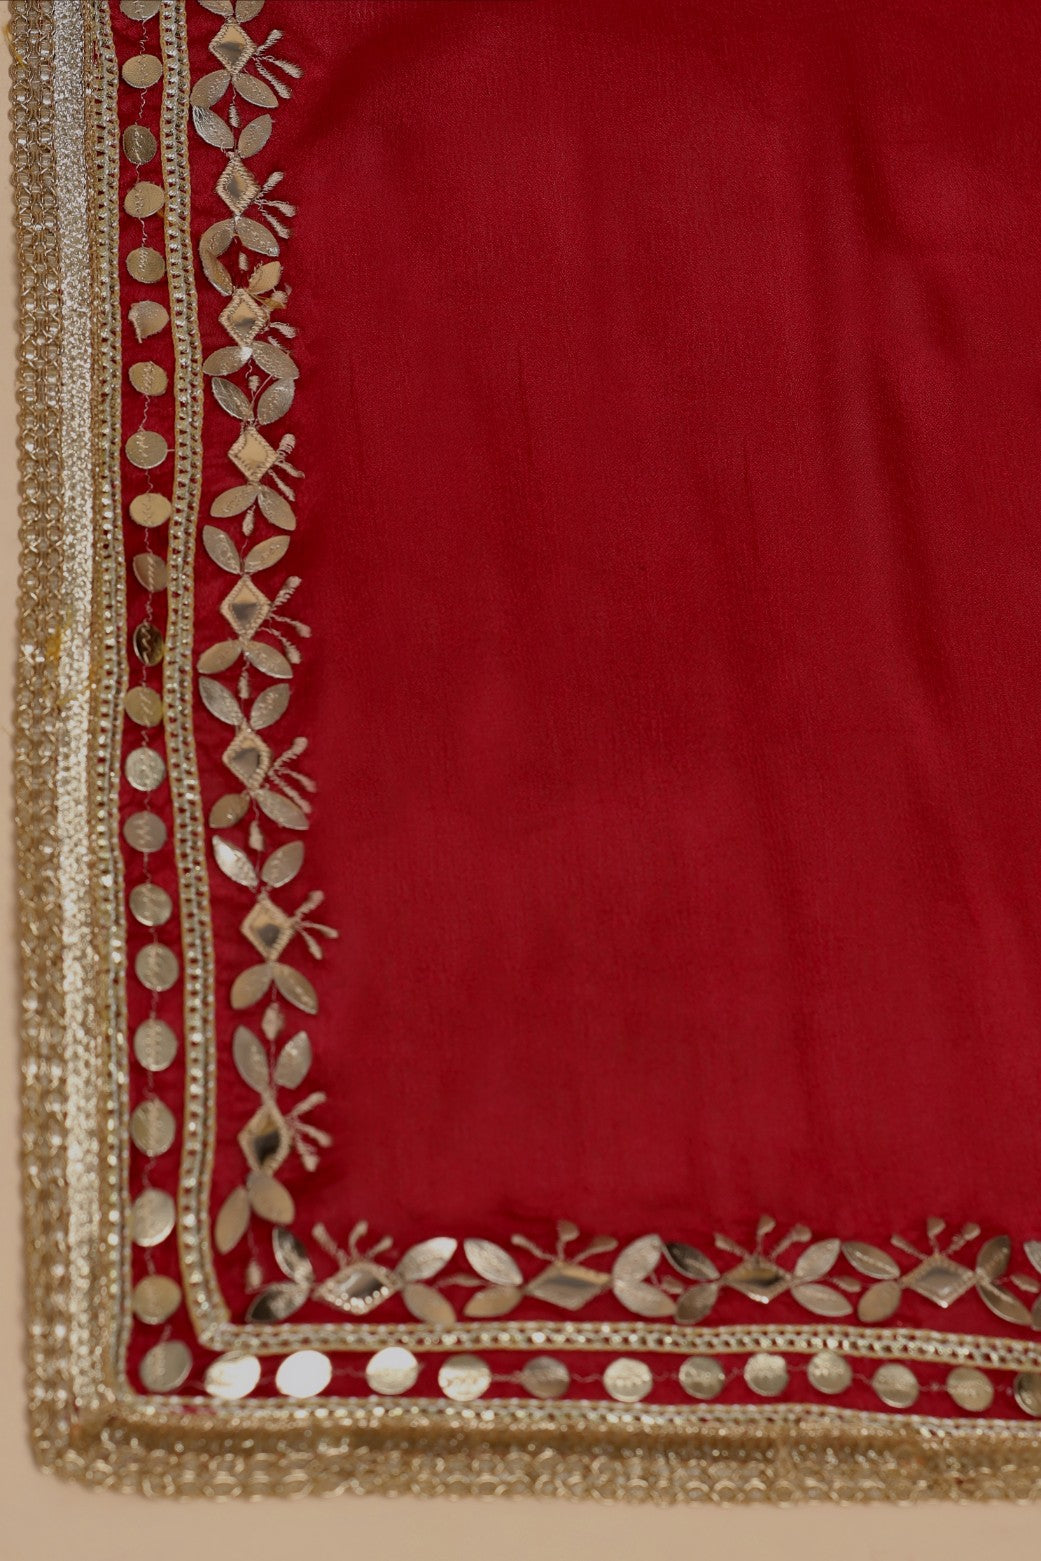 details of the heavy red dupatta